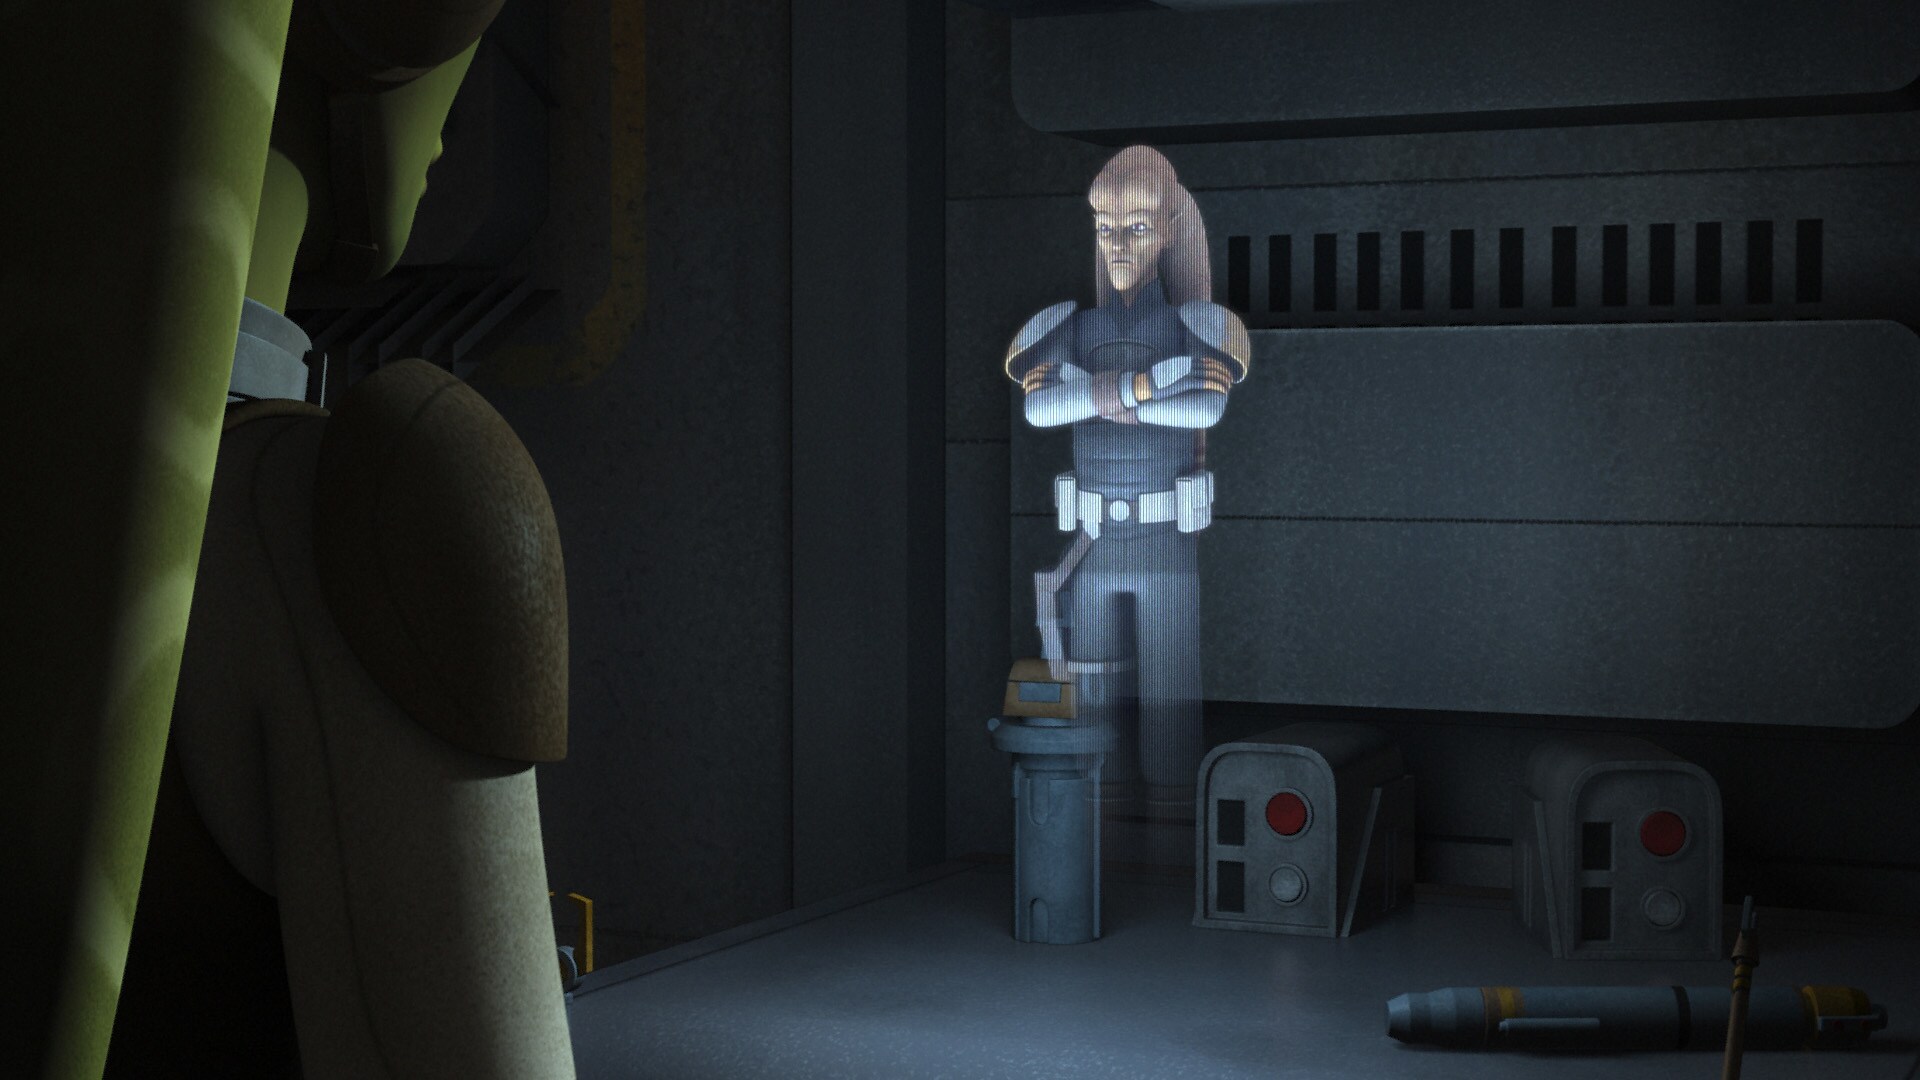 Hera seems troubled...and then contacts her father. "We need to talk," she says coldly.